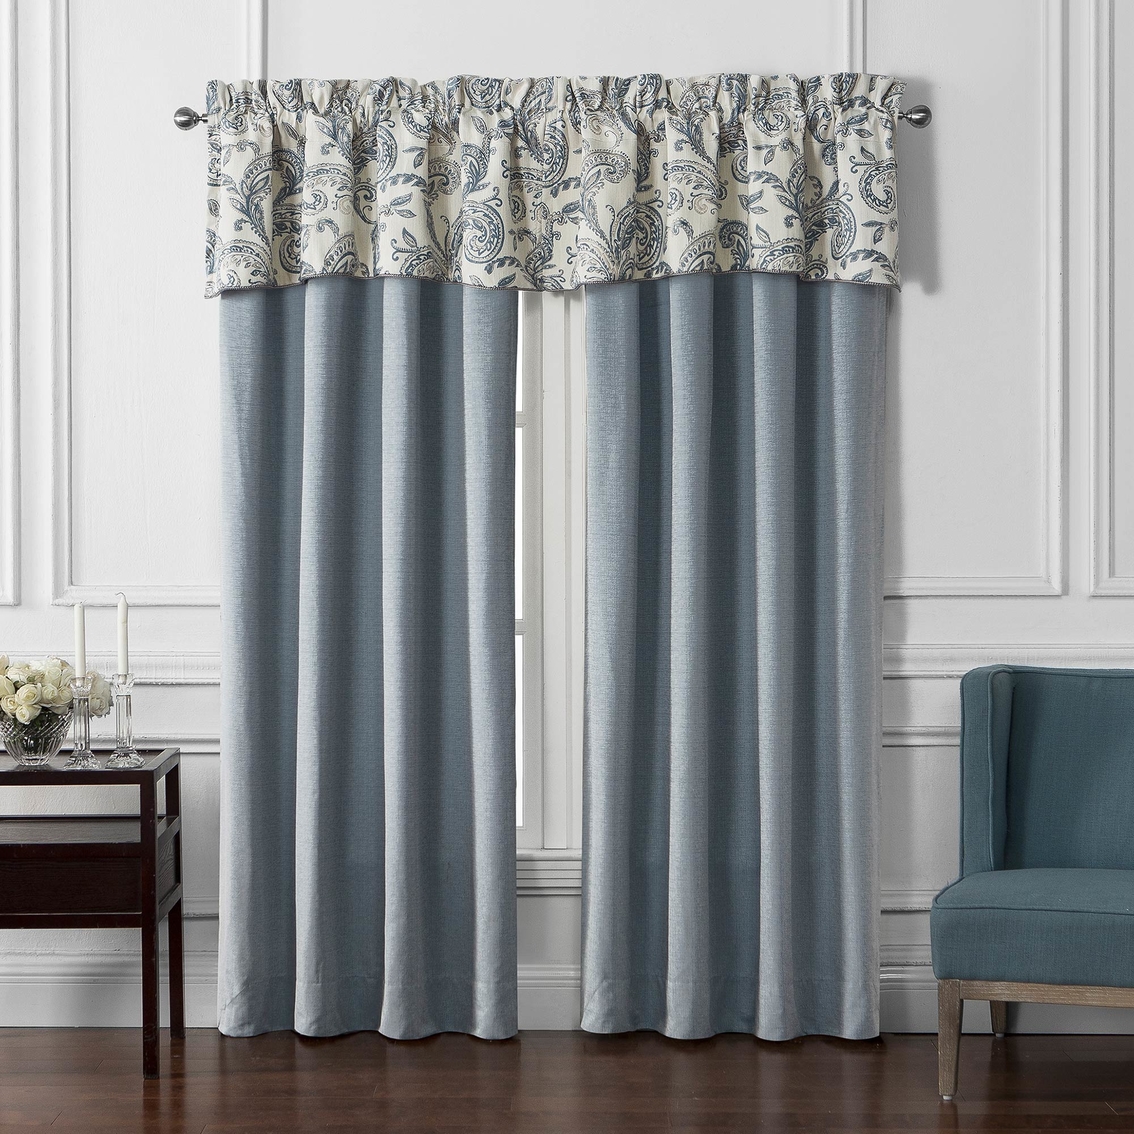 Waterford Florence Chambray Blue Scalloped Valance - Image 3 of 3